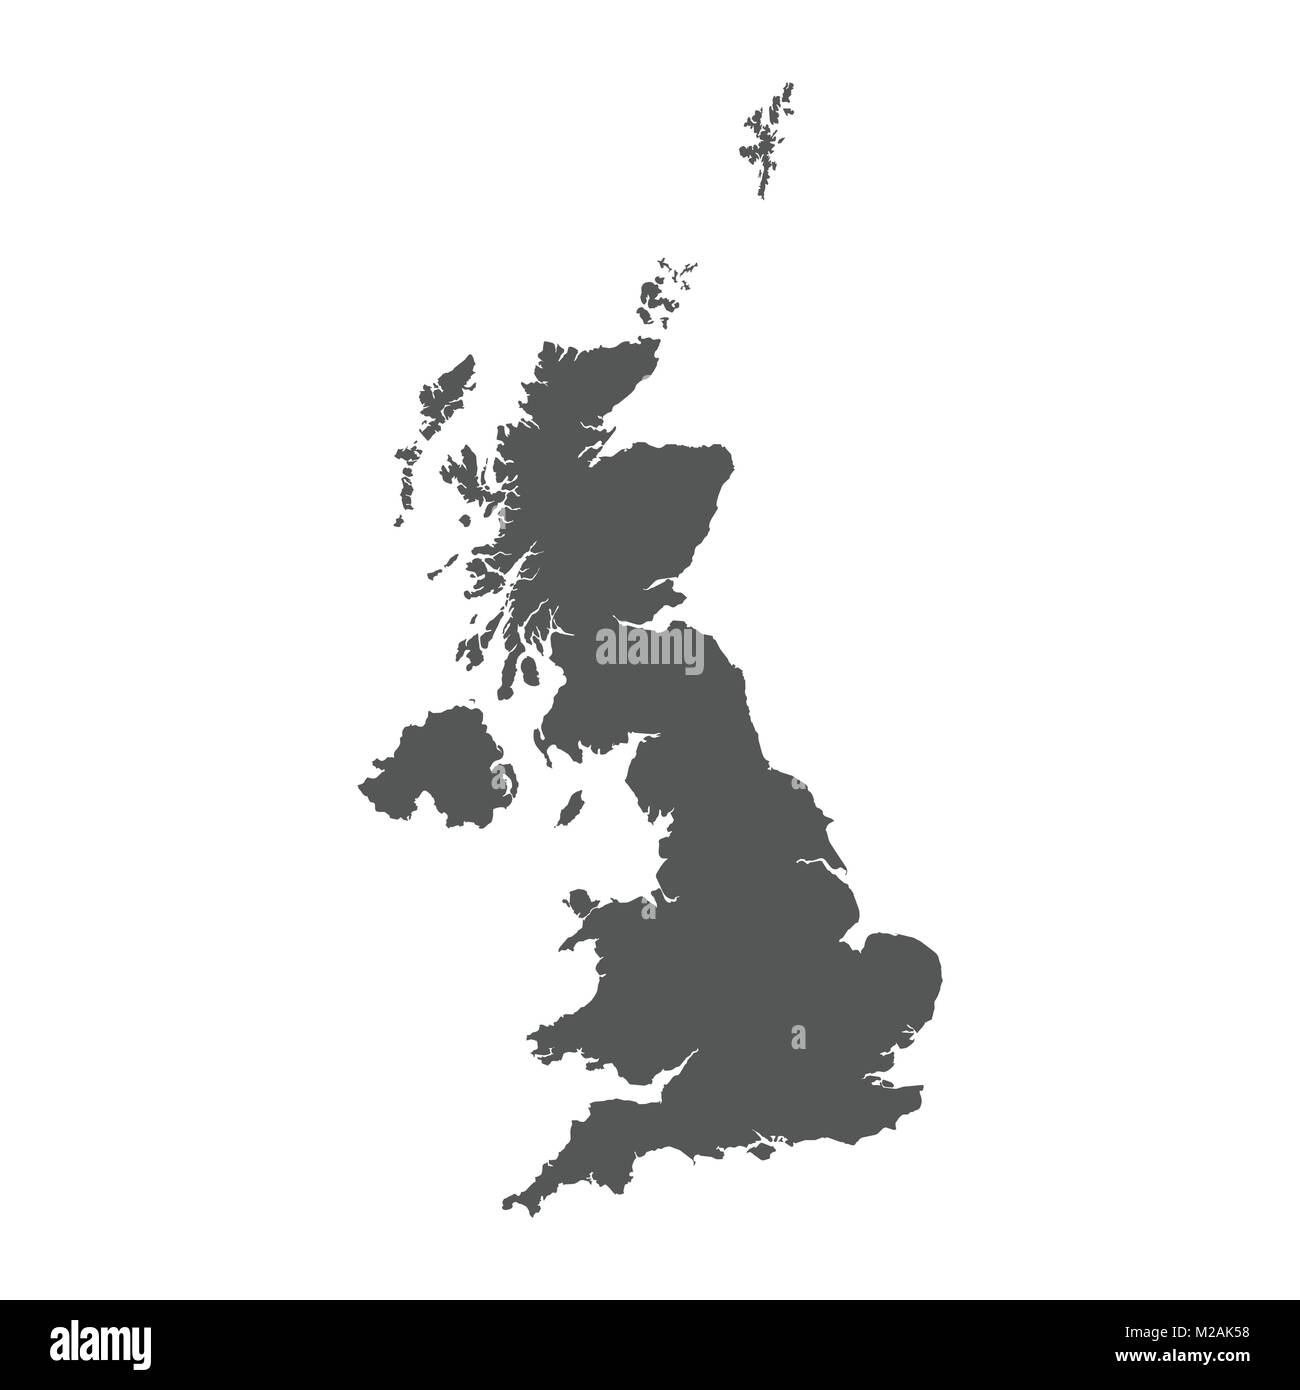 great britain vector map black icon on white background M2AK58